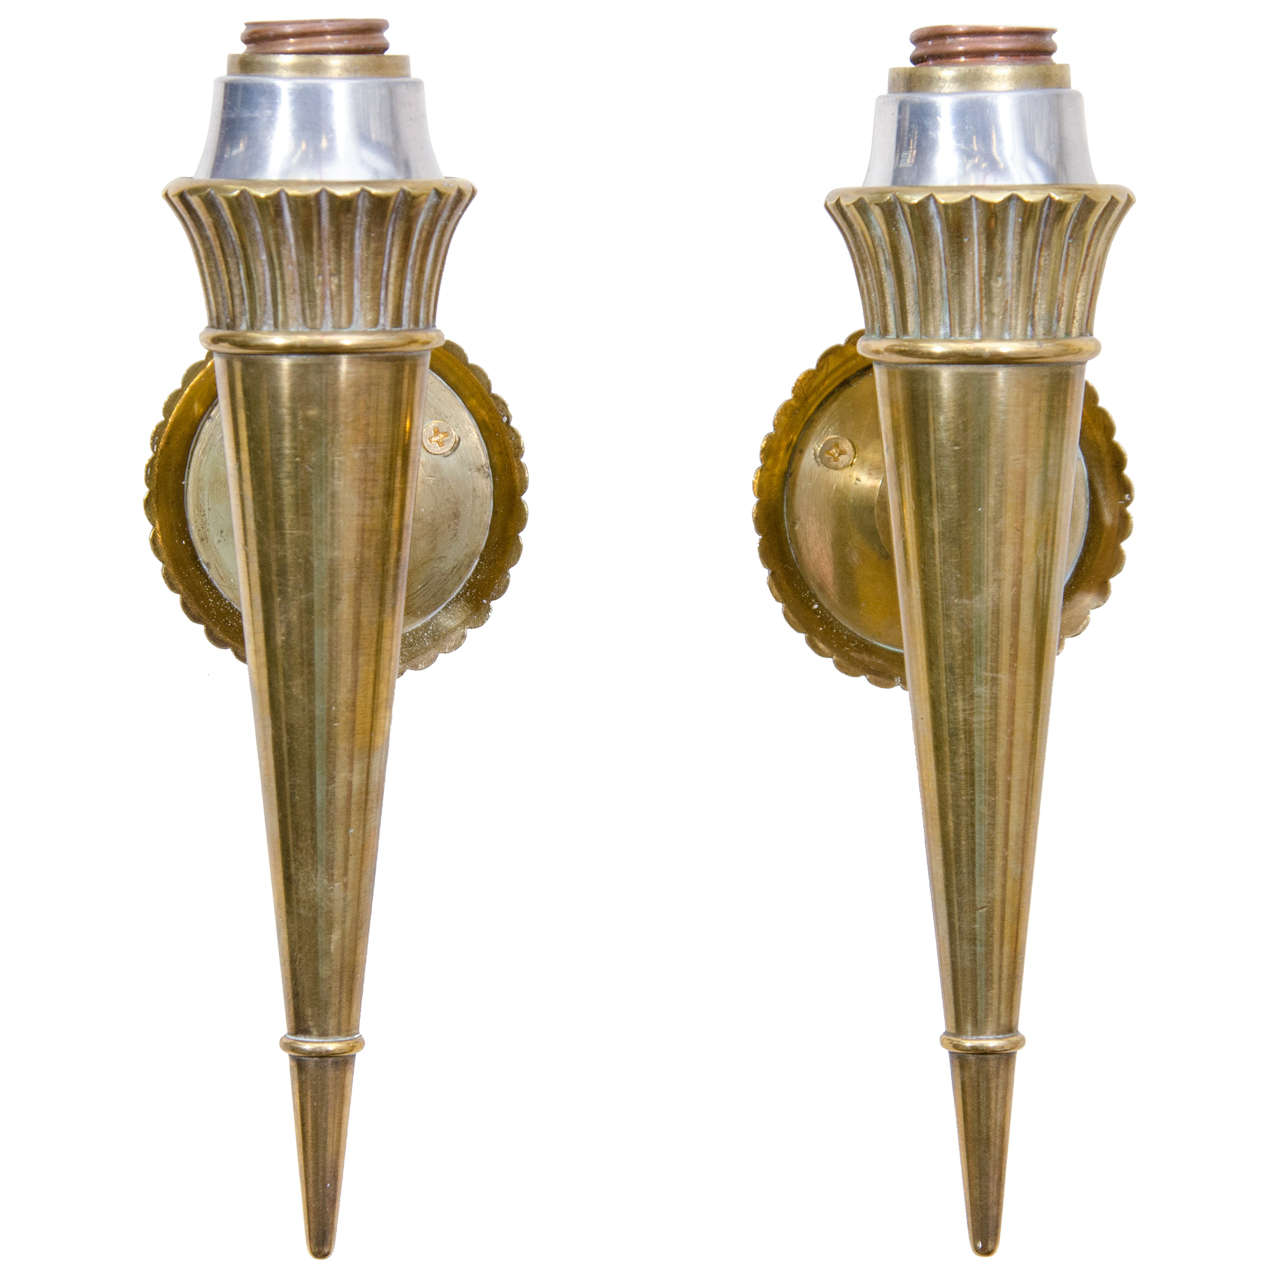 Pair of Vintage Bronze Sconces Attributed to Genet and Michon